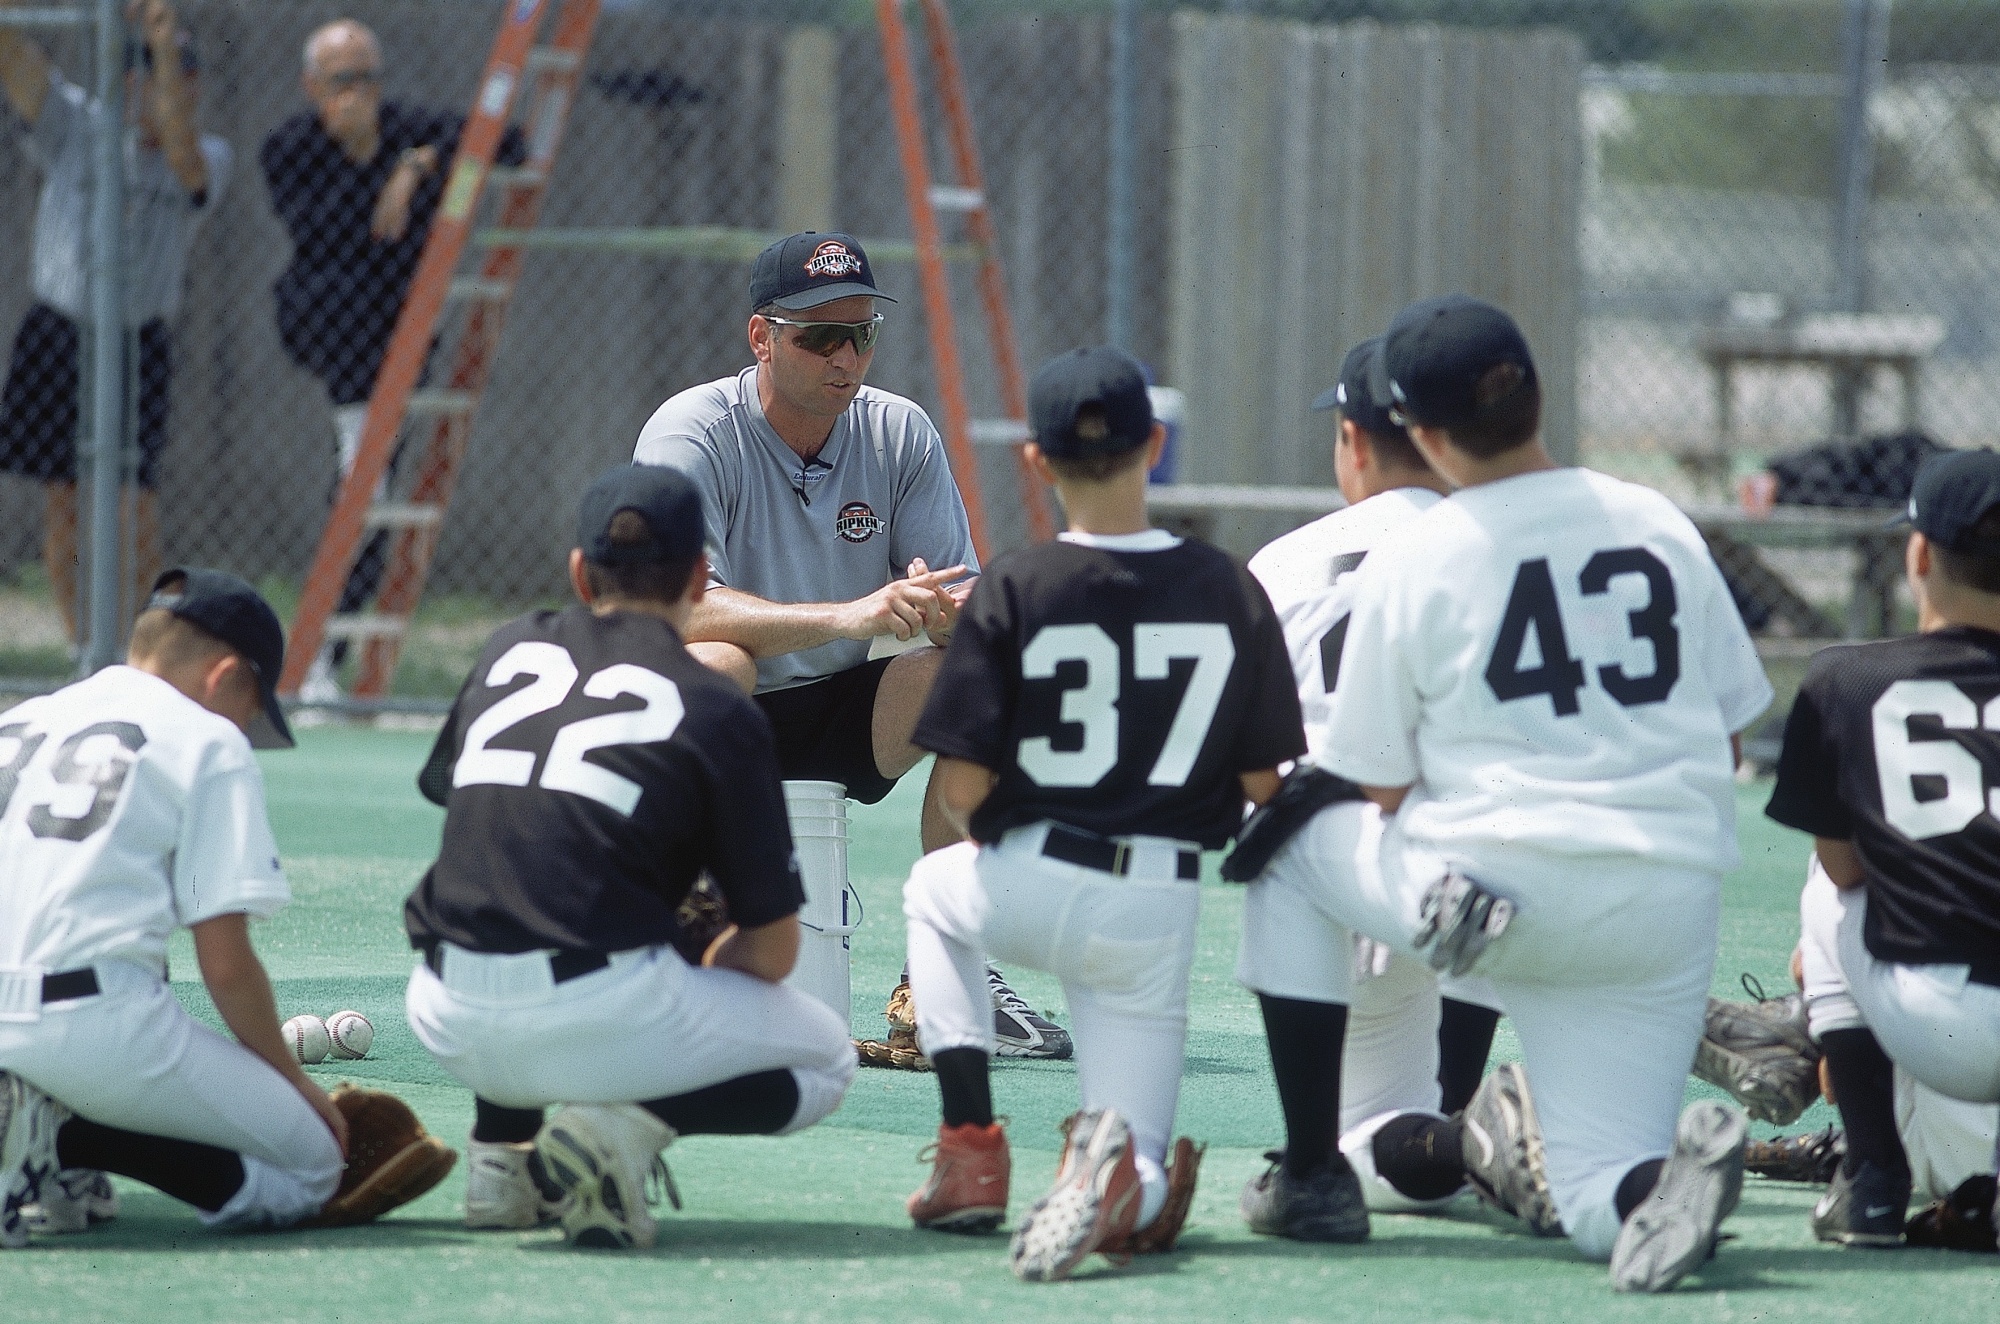 Cal Ripken youth baseball experience merging with Cooperstown All Star  Village 